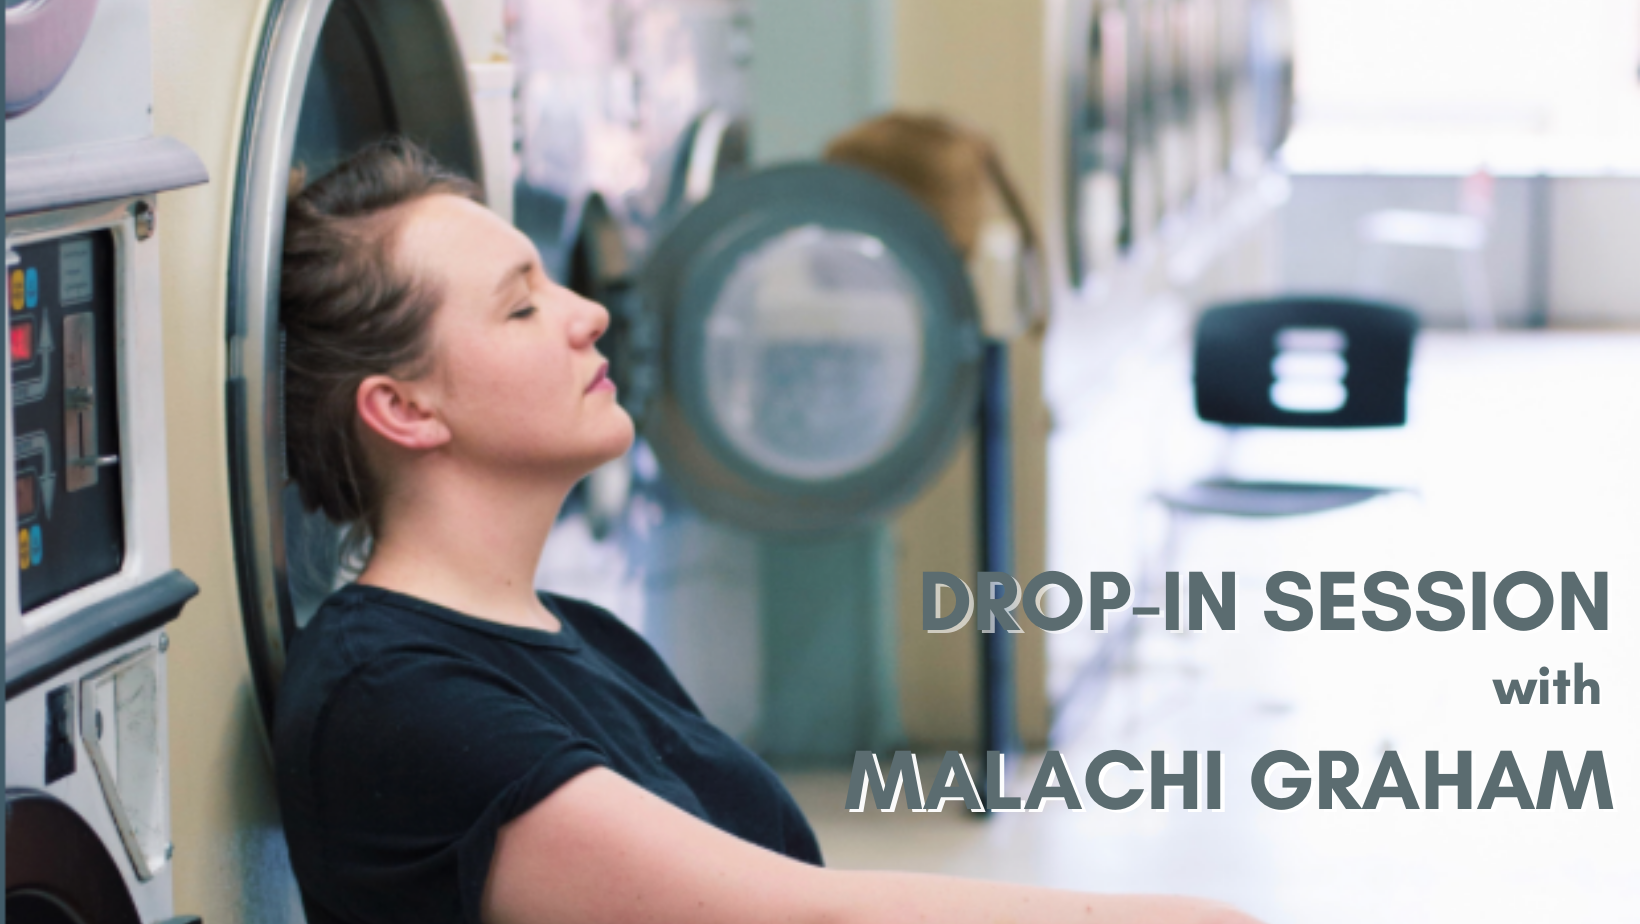 Drop-In Session with Malachi Graham